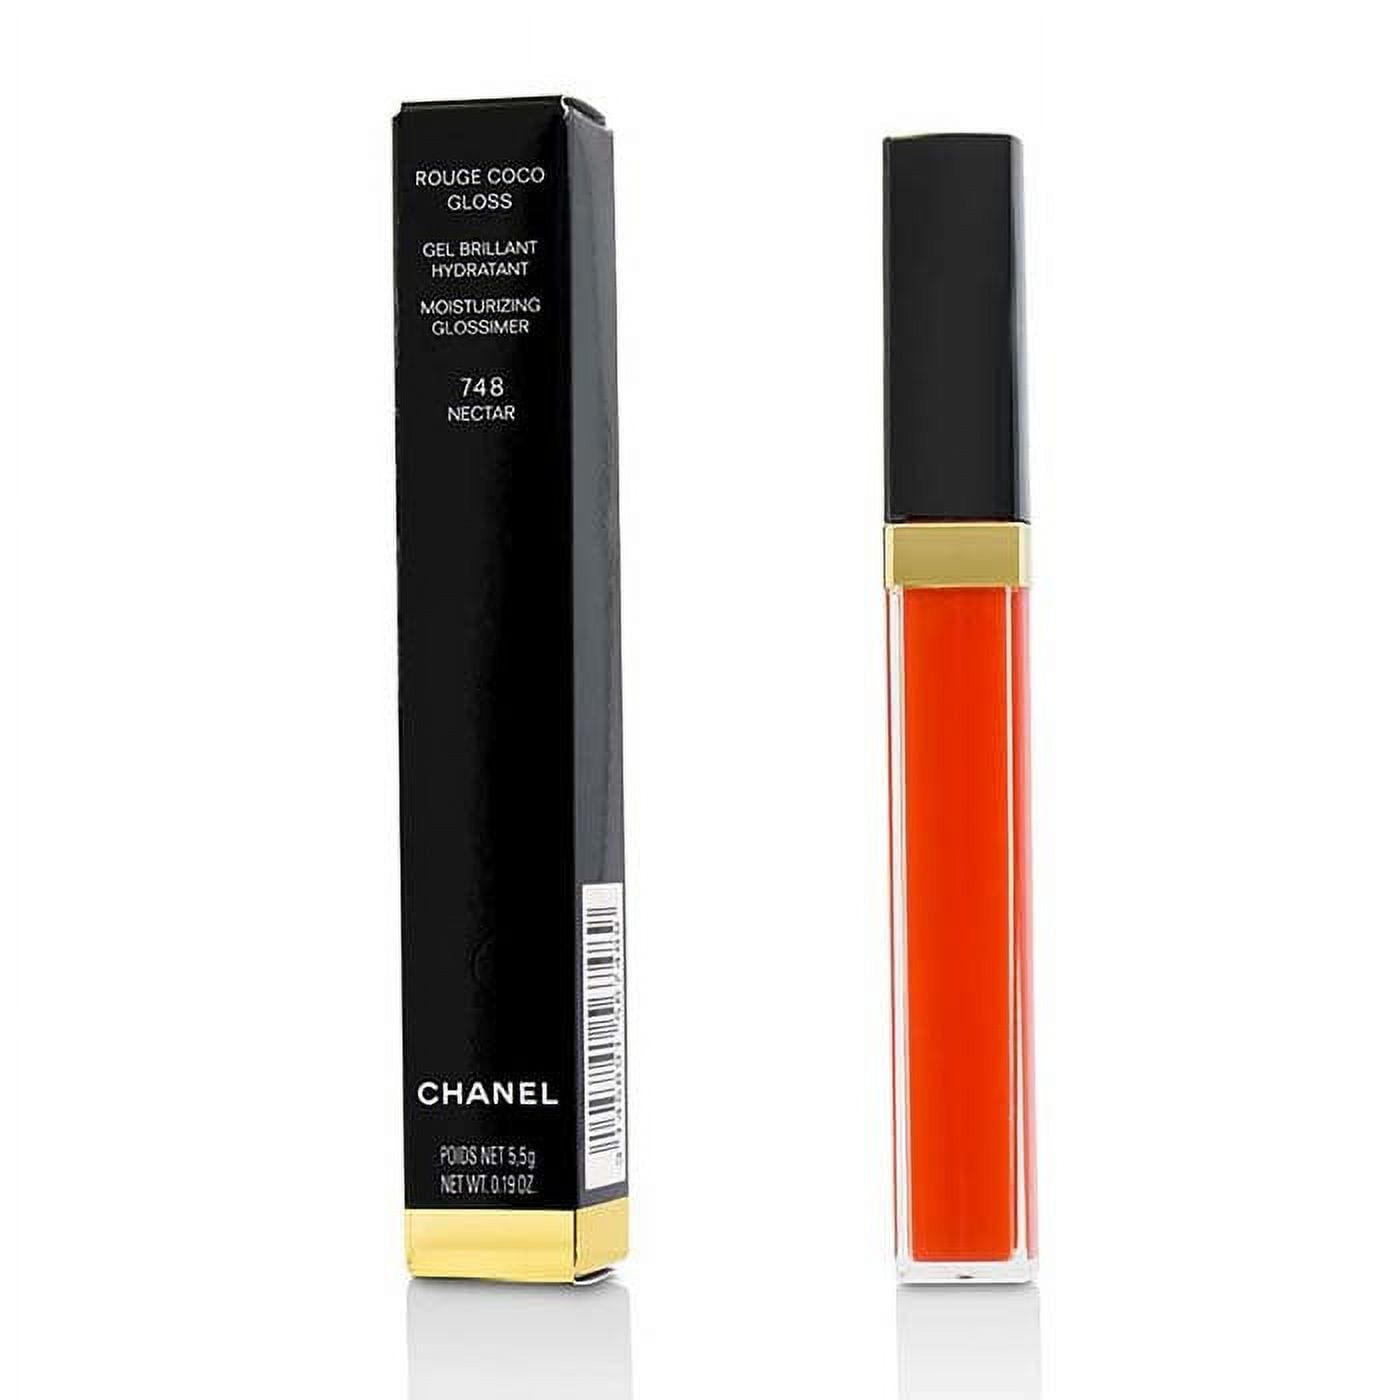 CHANEL, Makeup, Chanel Holiday Gift Set 222 Sheer Genius Lipgloss Trio Set  Red Tweed Pouch